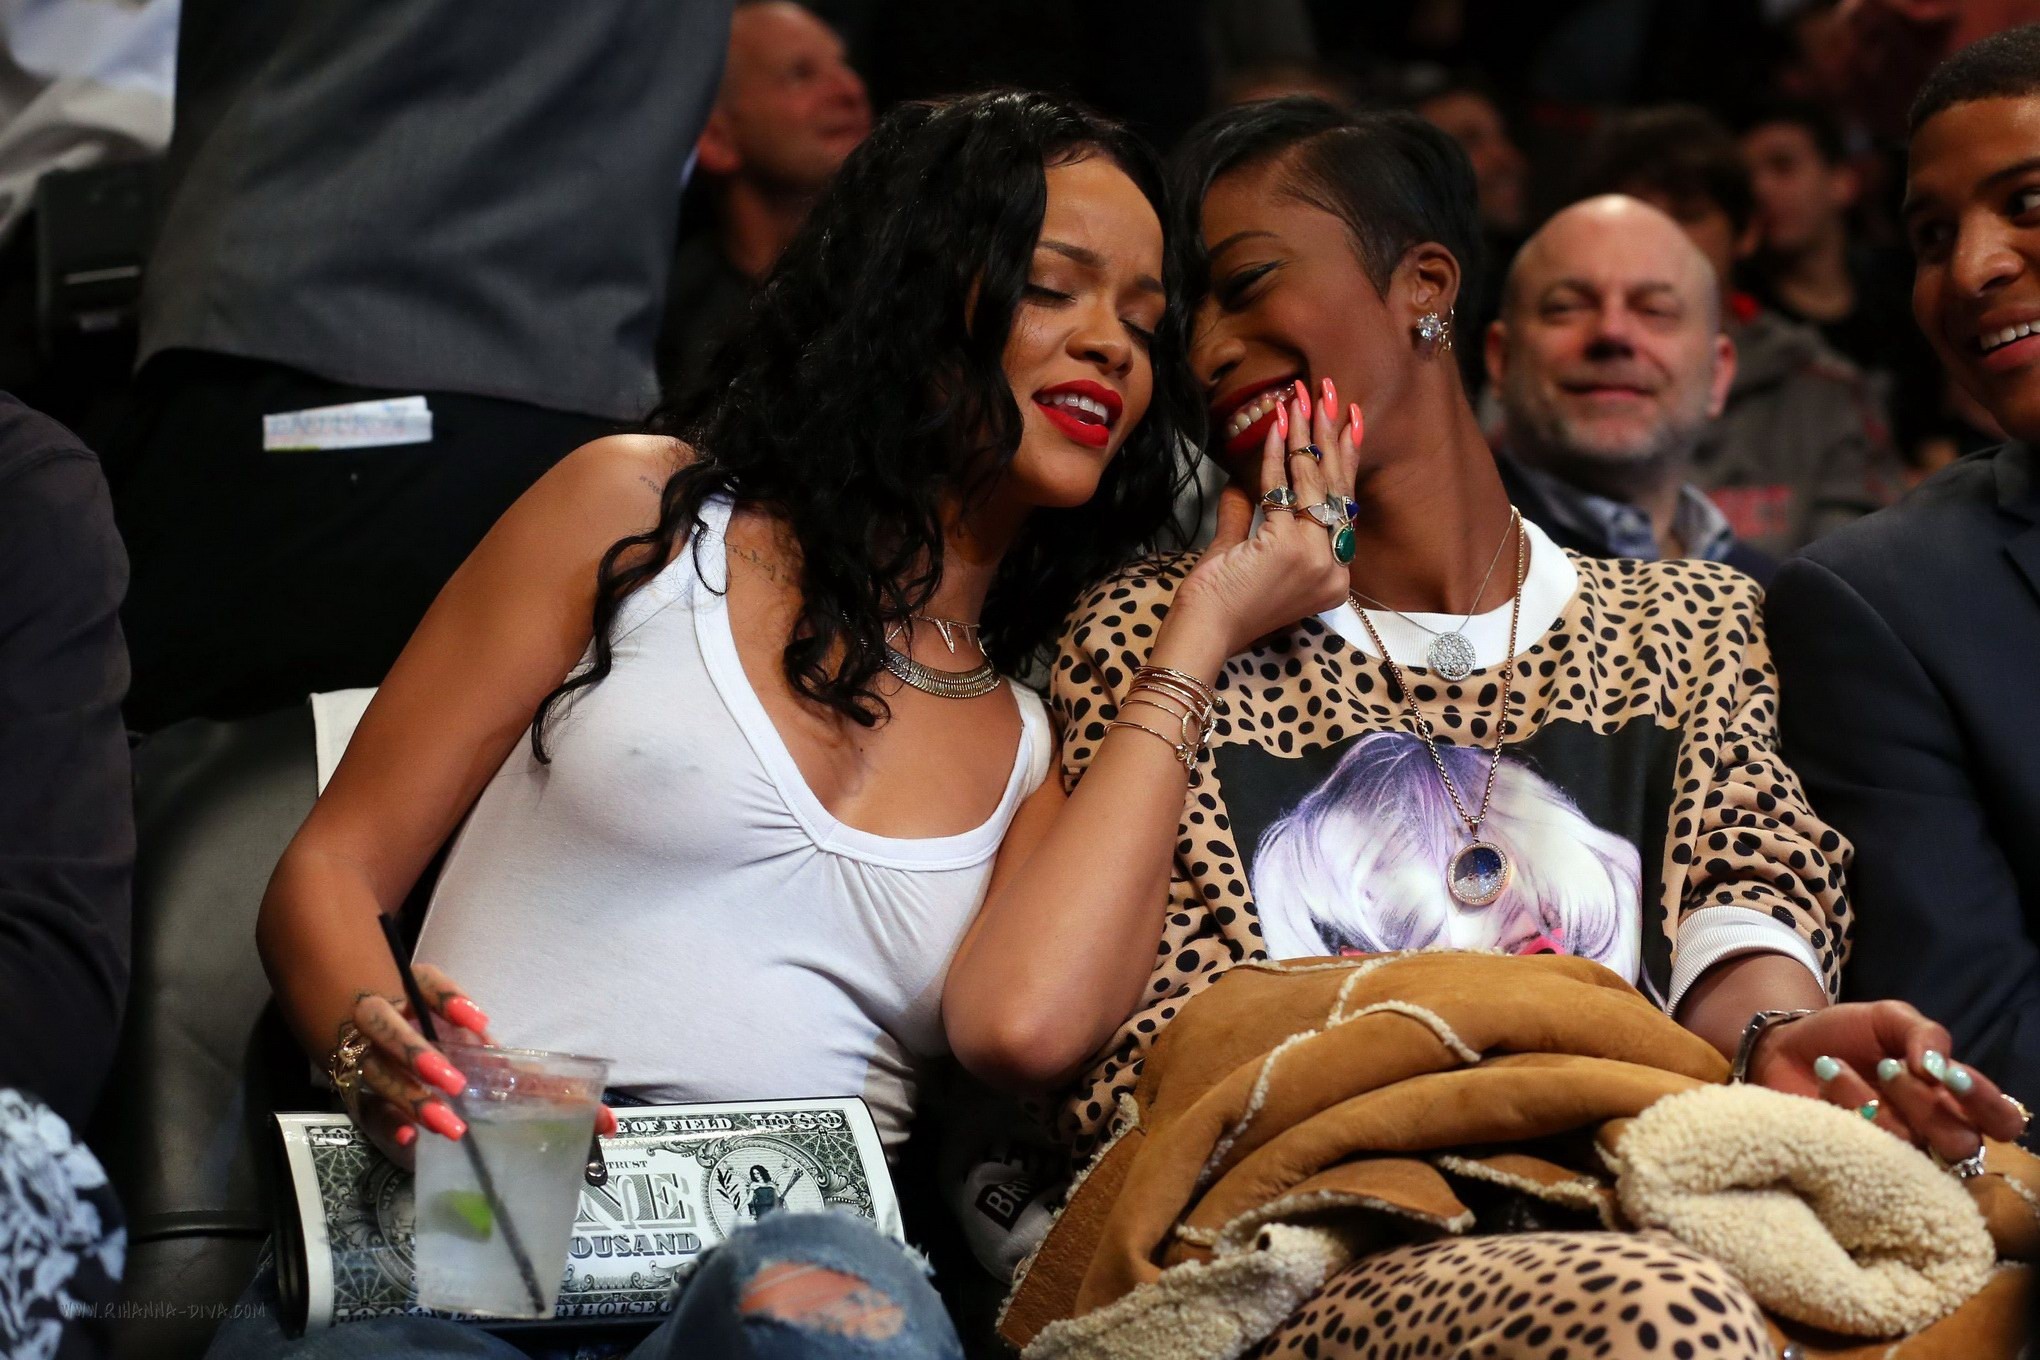 Rihanna shows off her boobs in seethru top at a basketball game in NYC #75197967